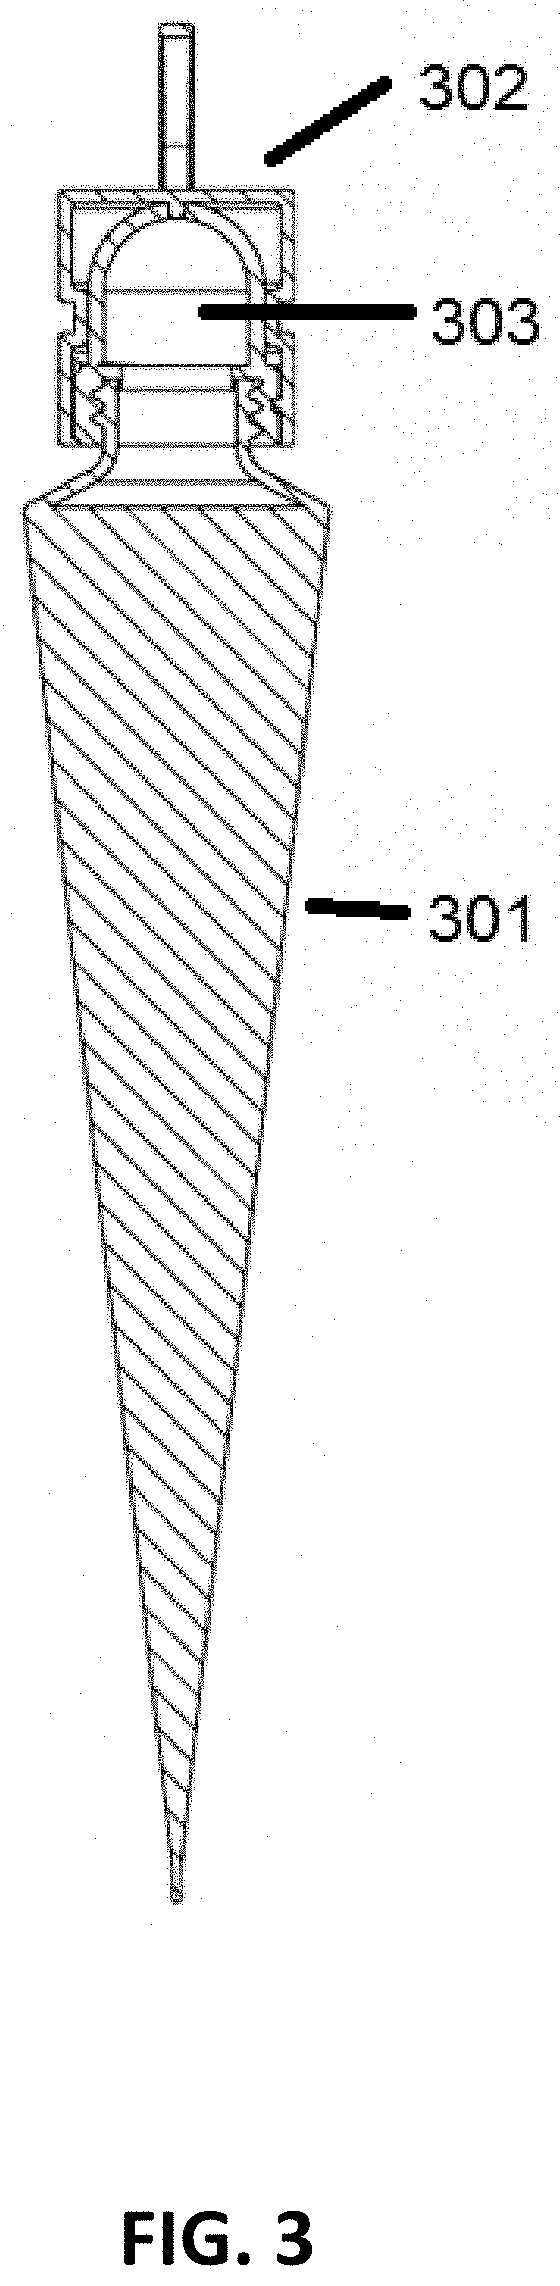 Applicator and assembly for flexible container